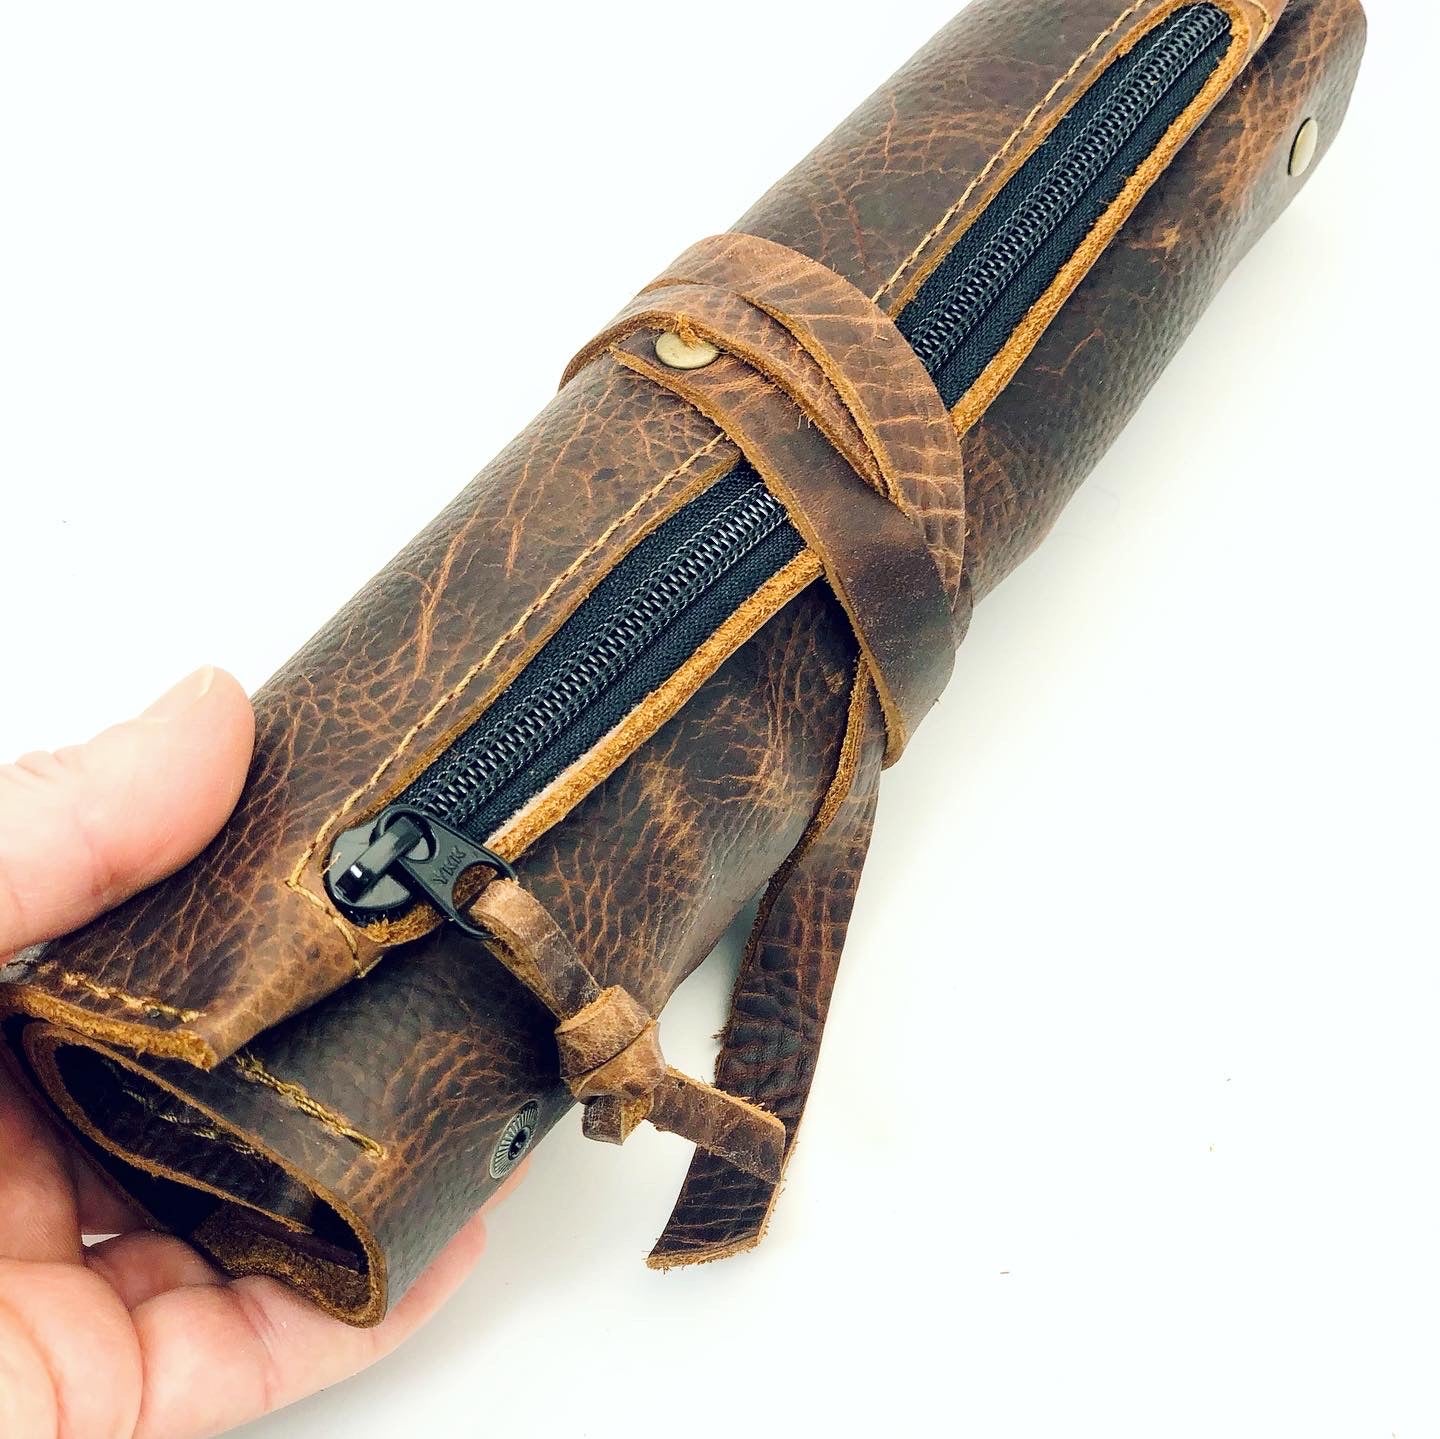 Leather Jewelry Roll